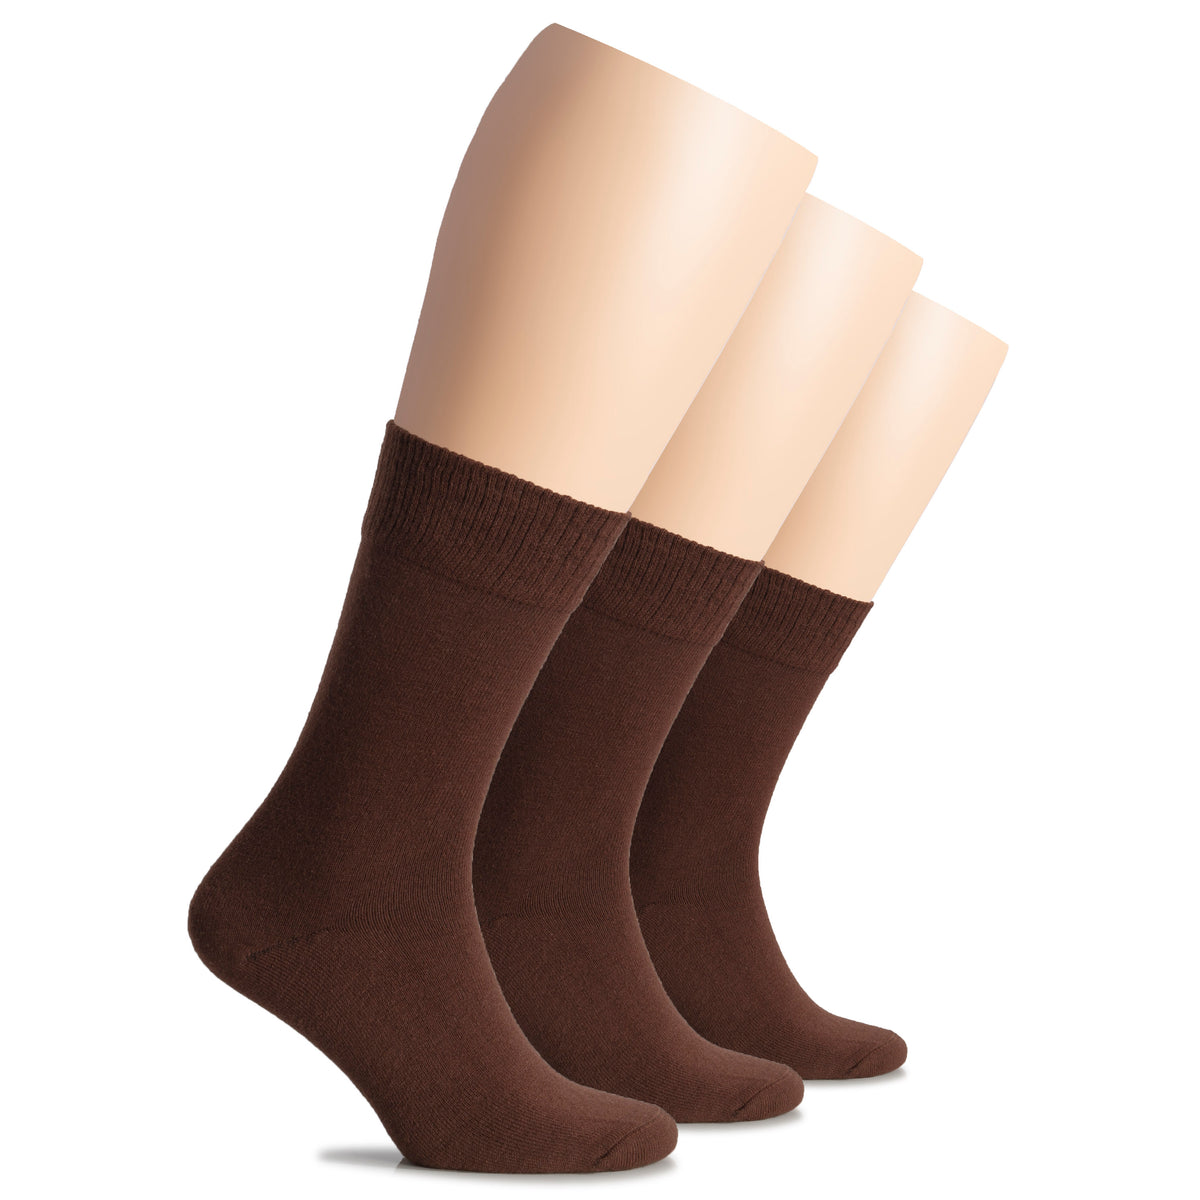 A trio of wool women's crew socks in brown, neatly arranged on a white background.